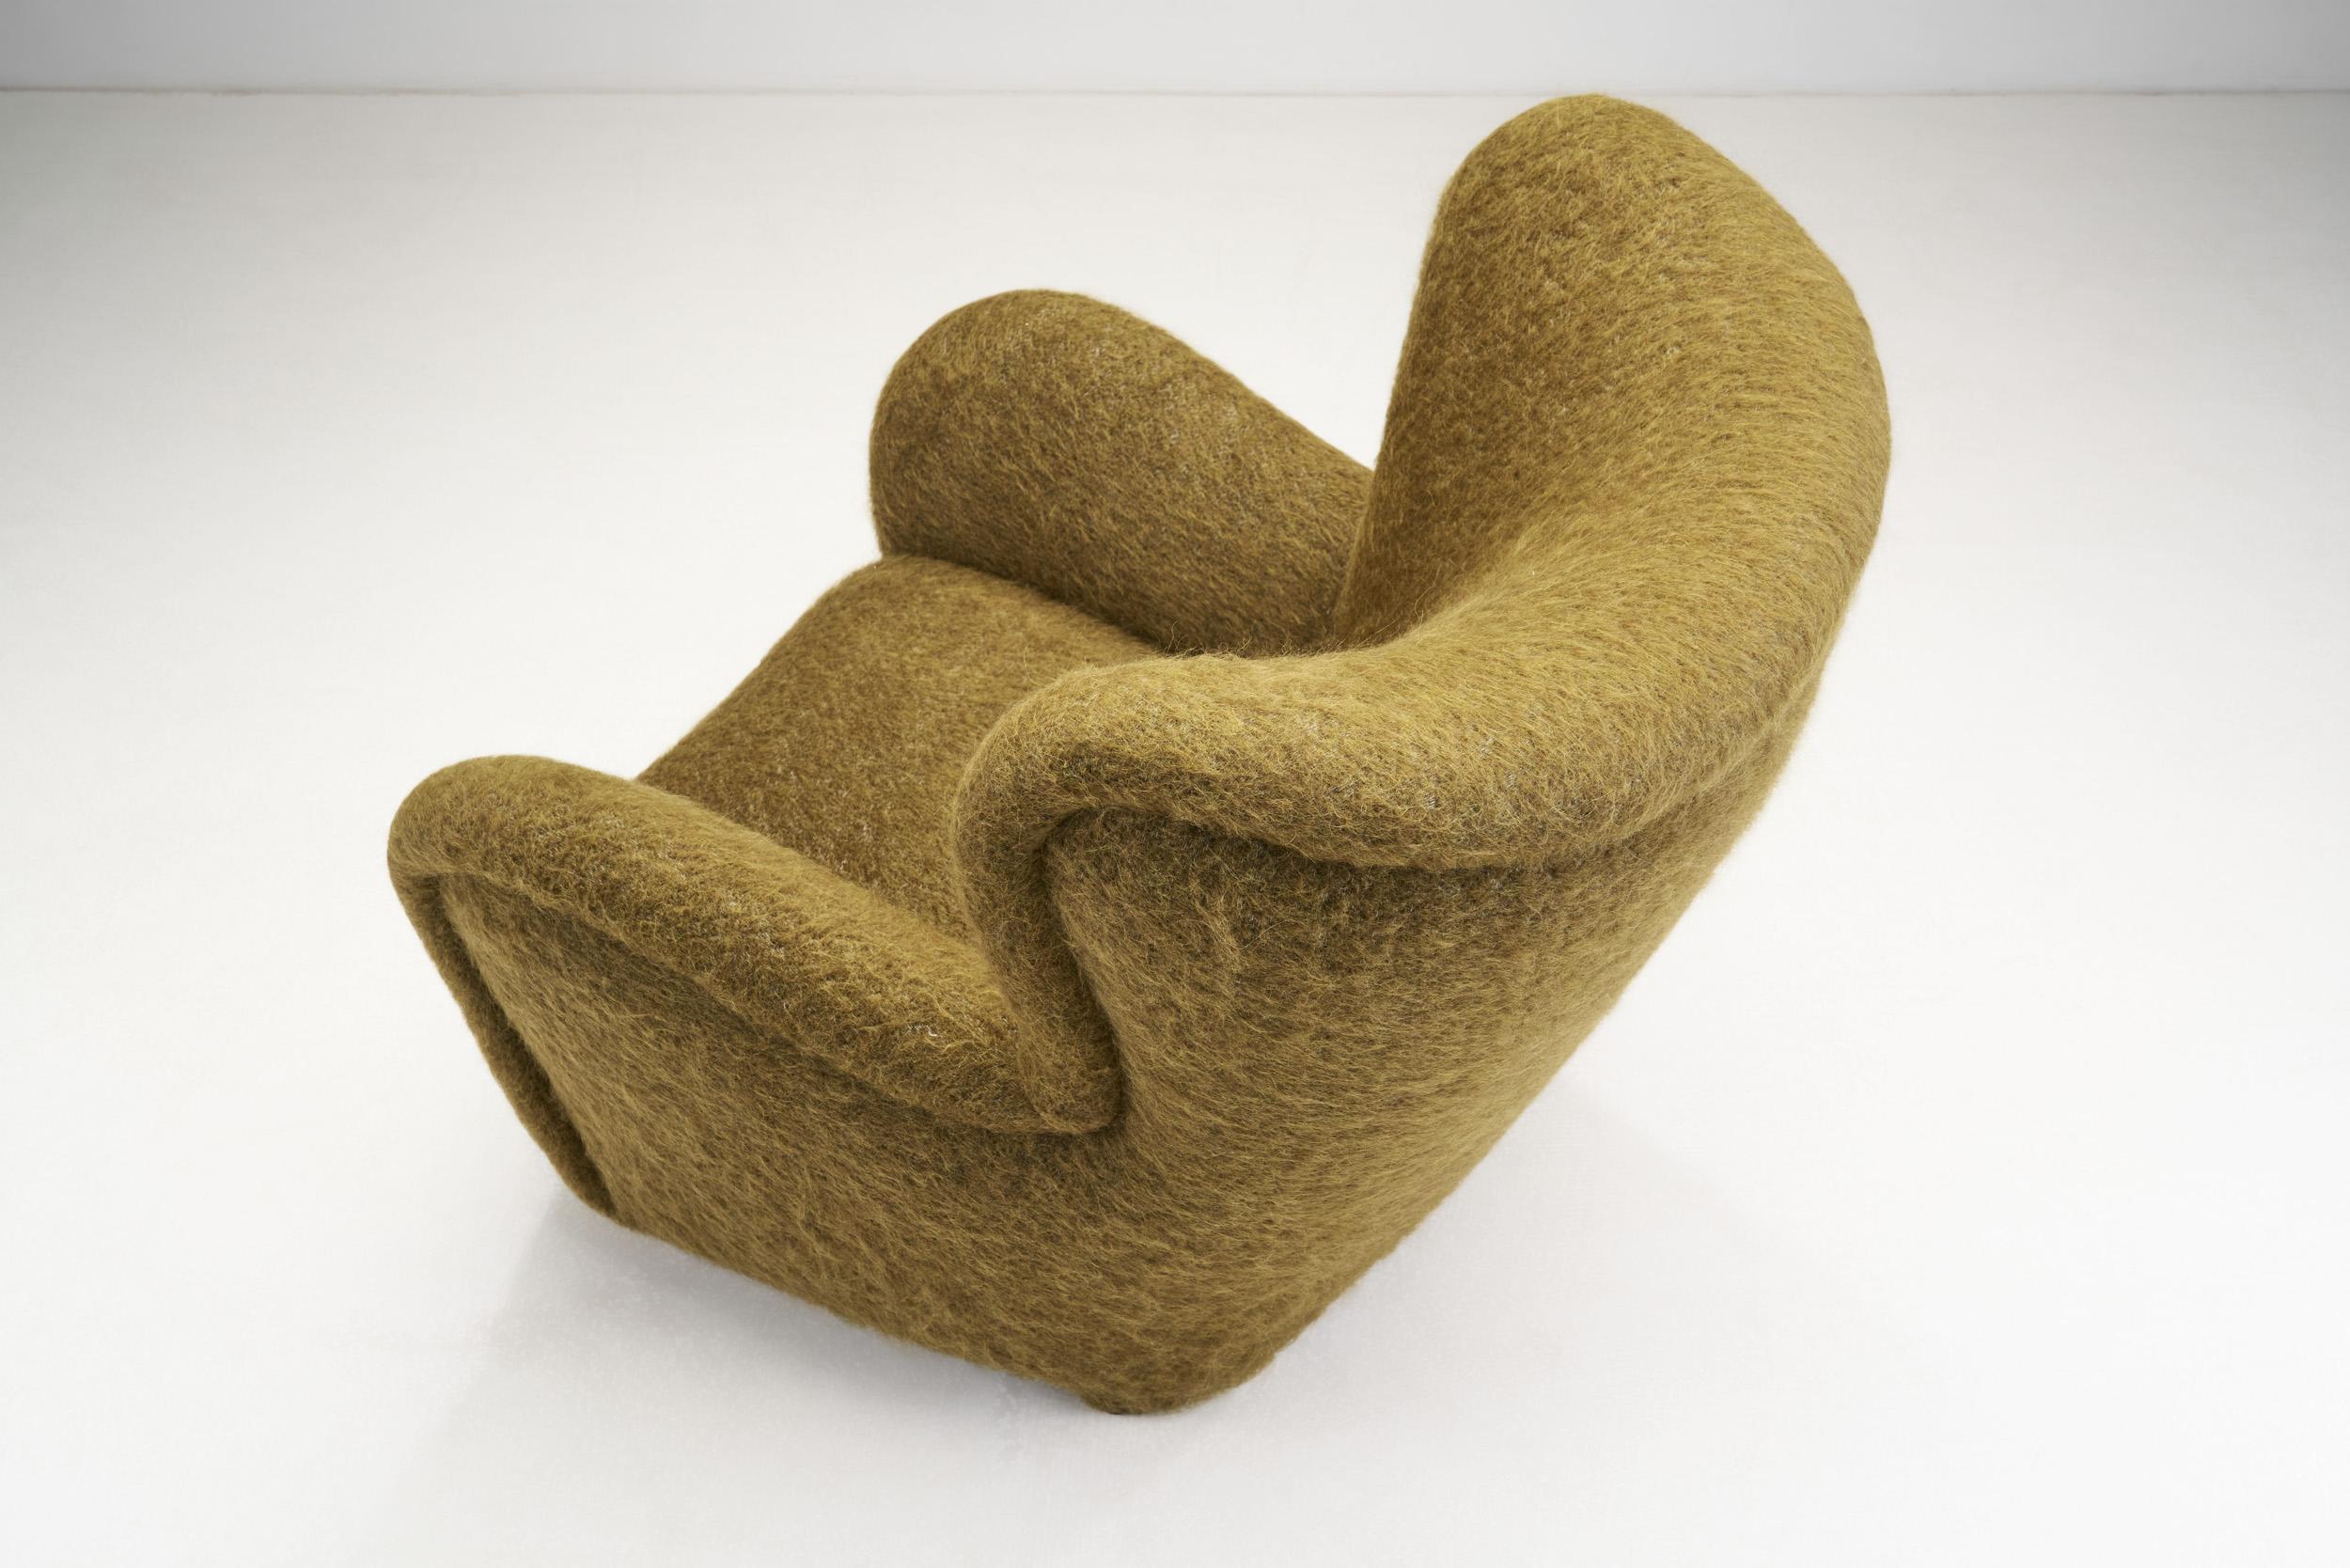 Fabric Upholstered Finnish Lounge Chair and Ottoman, Finland, 1950s